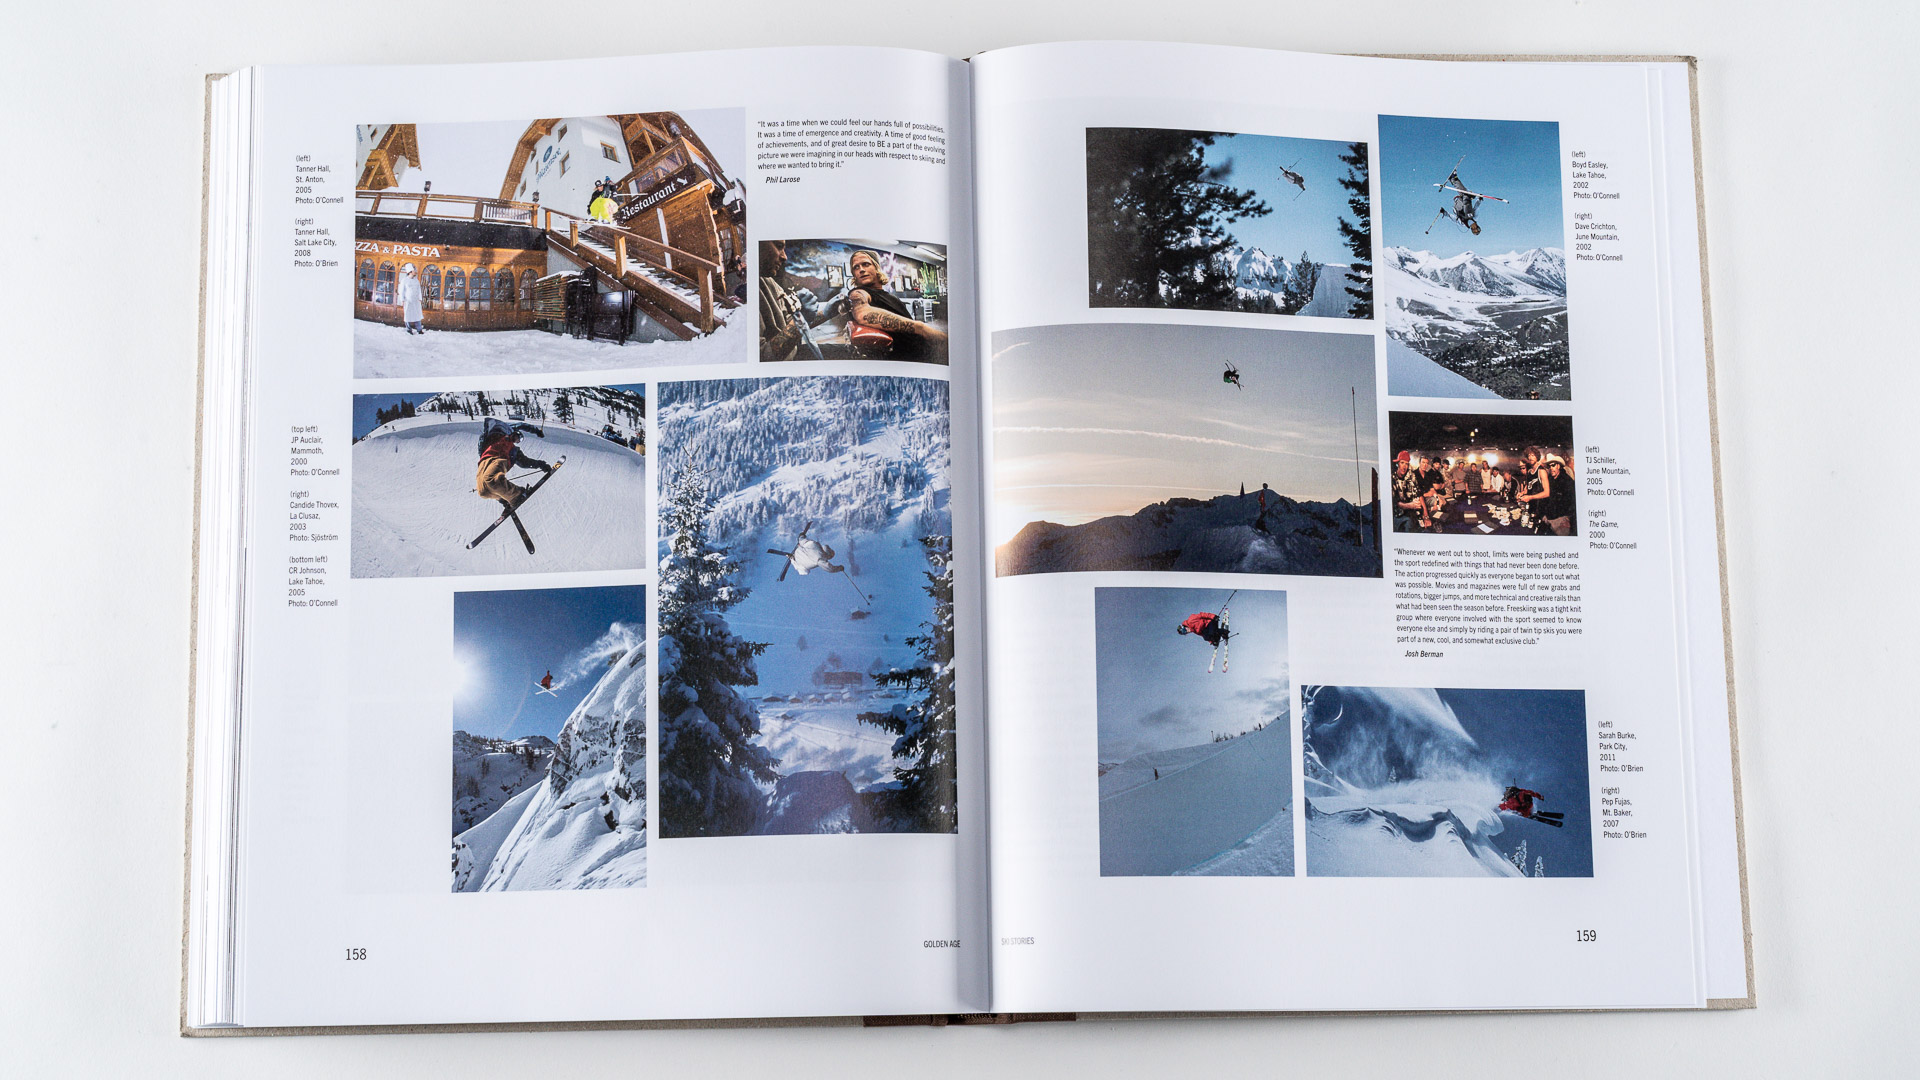 The Golden Age of Freeskiing feature in Ski Stories Volume 3